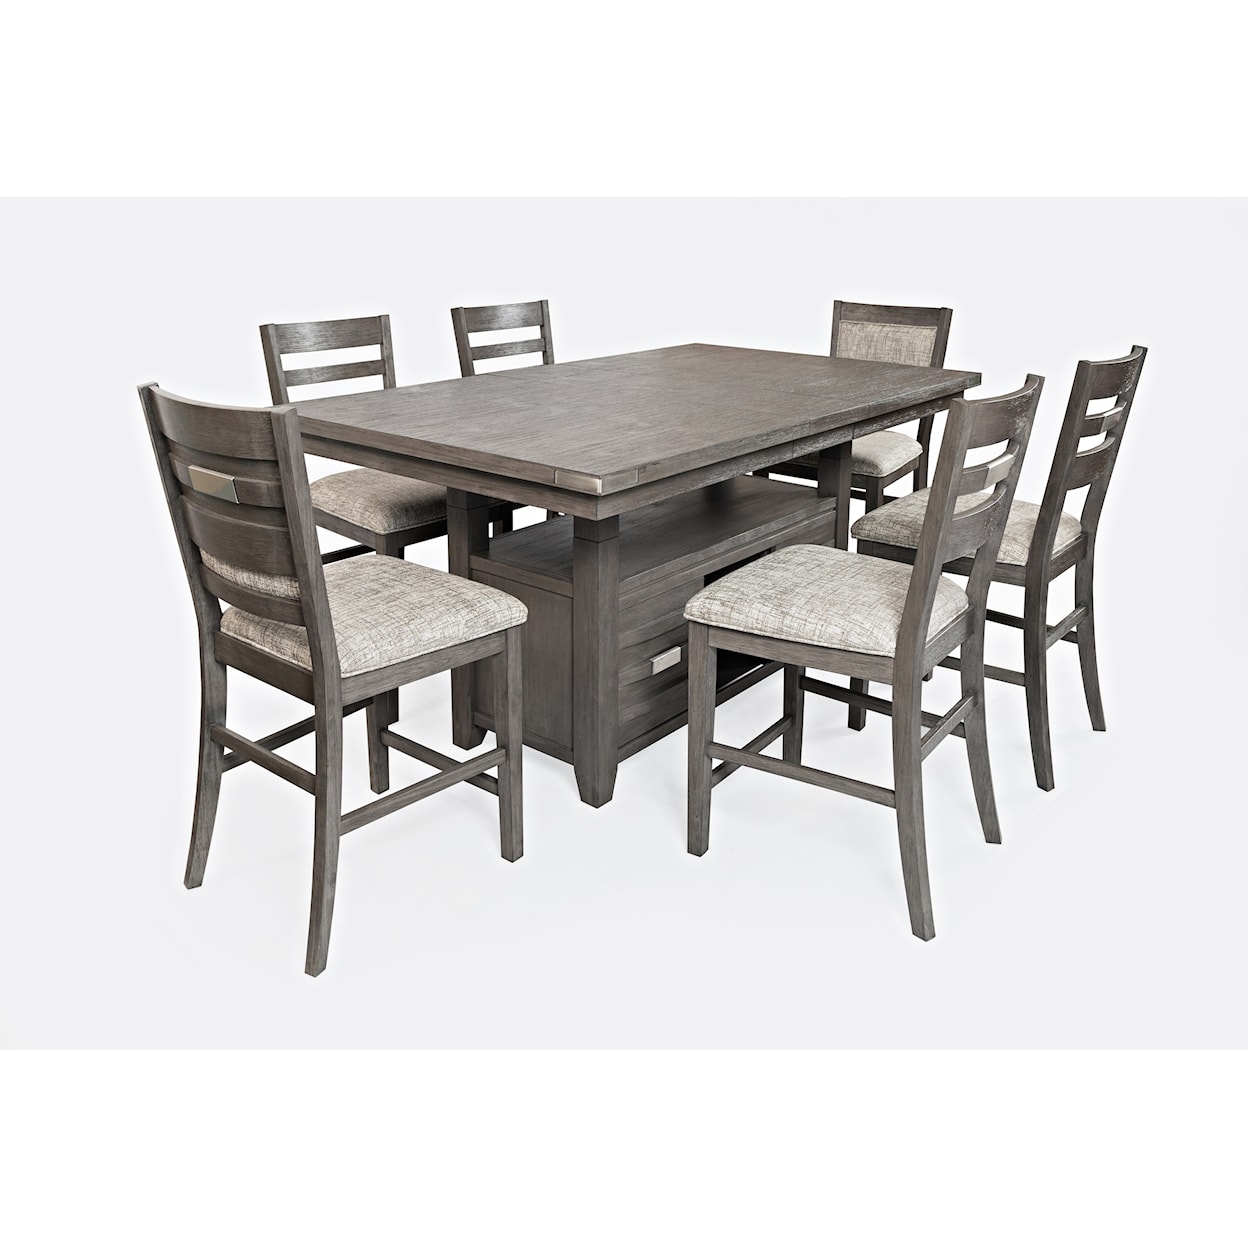 Jofran Altamonte - 1850 Counter Height Dining Table